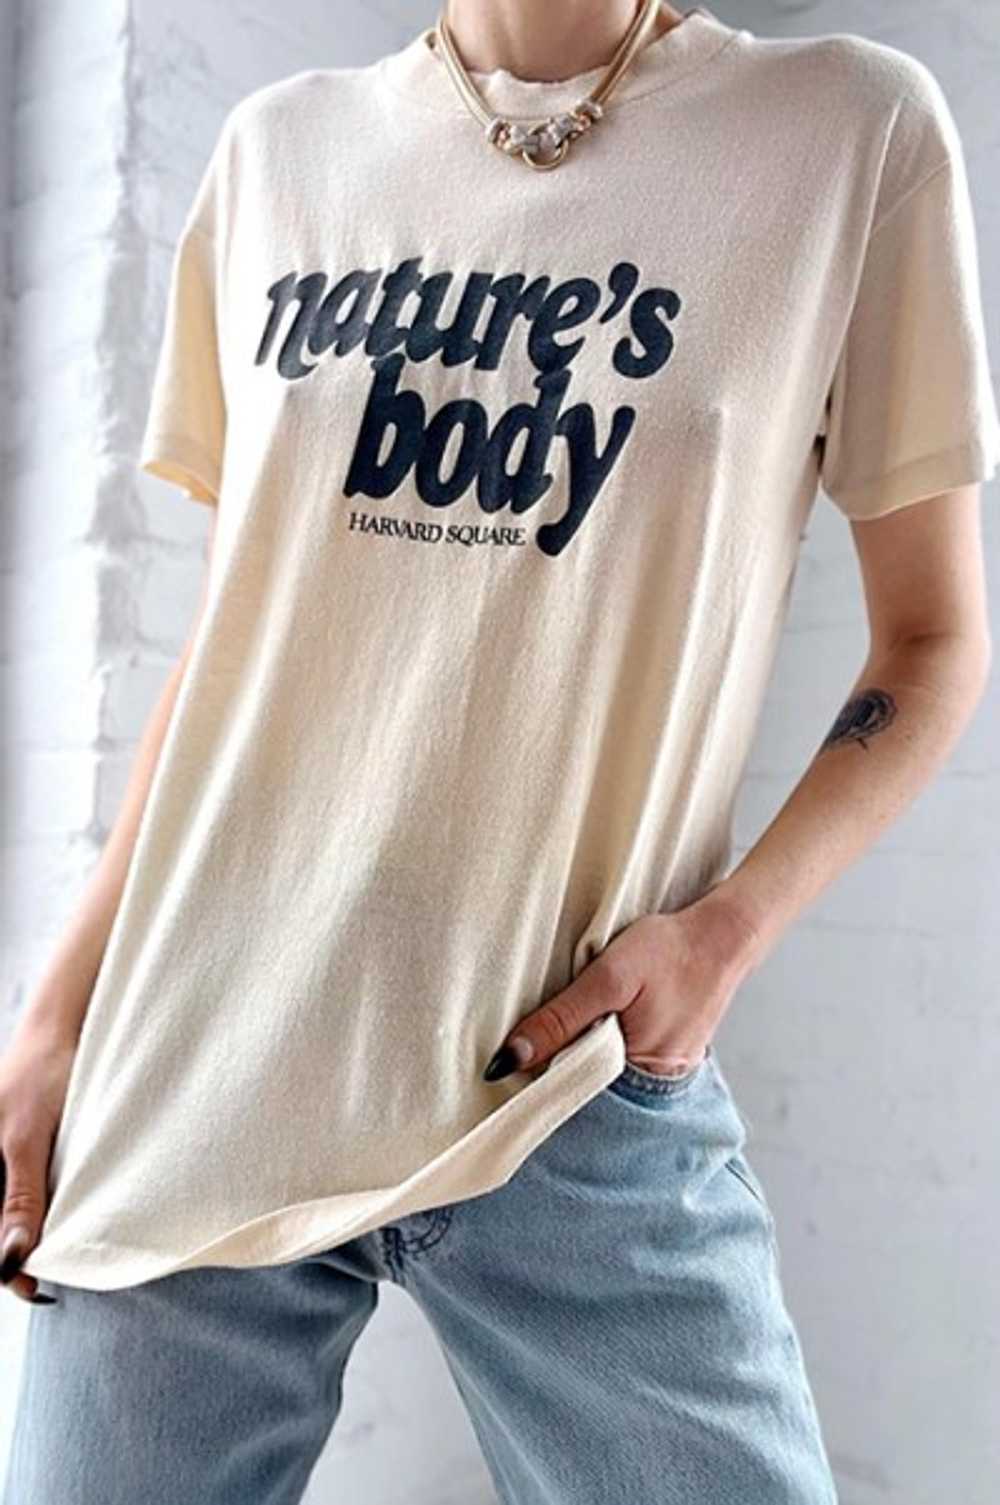 natures body tee - image 3